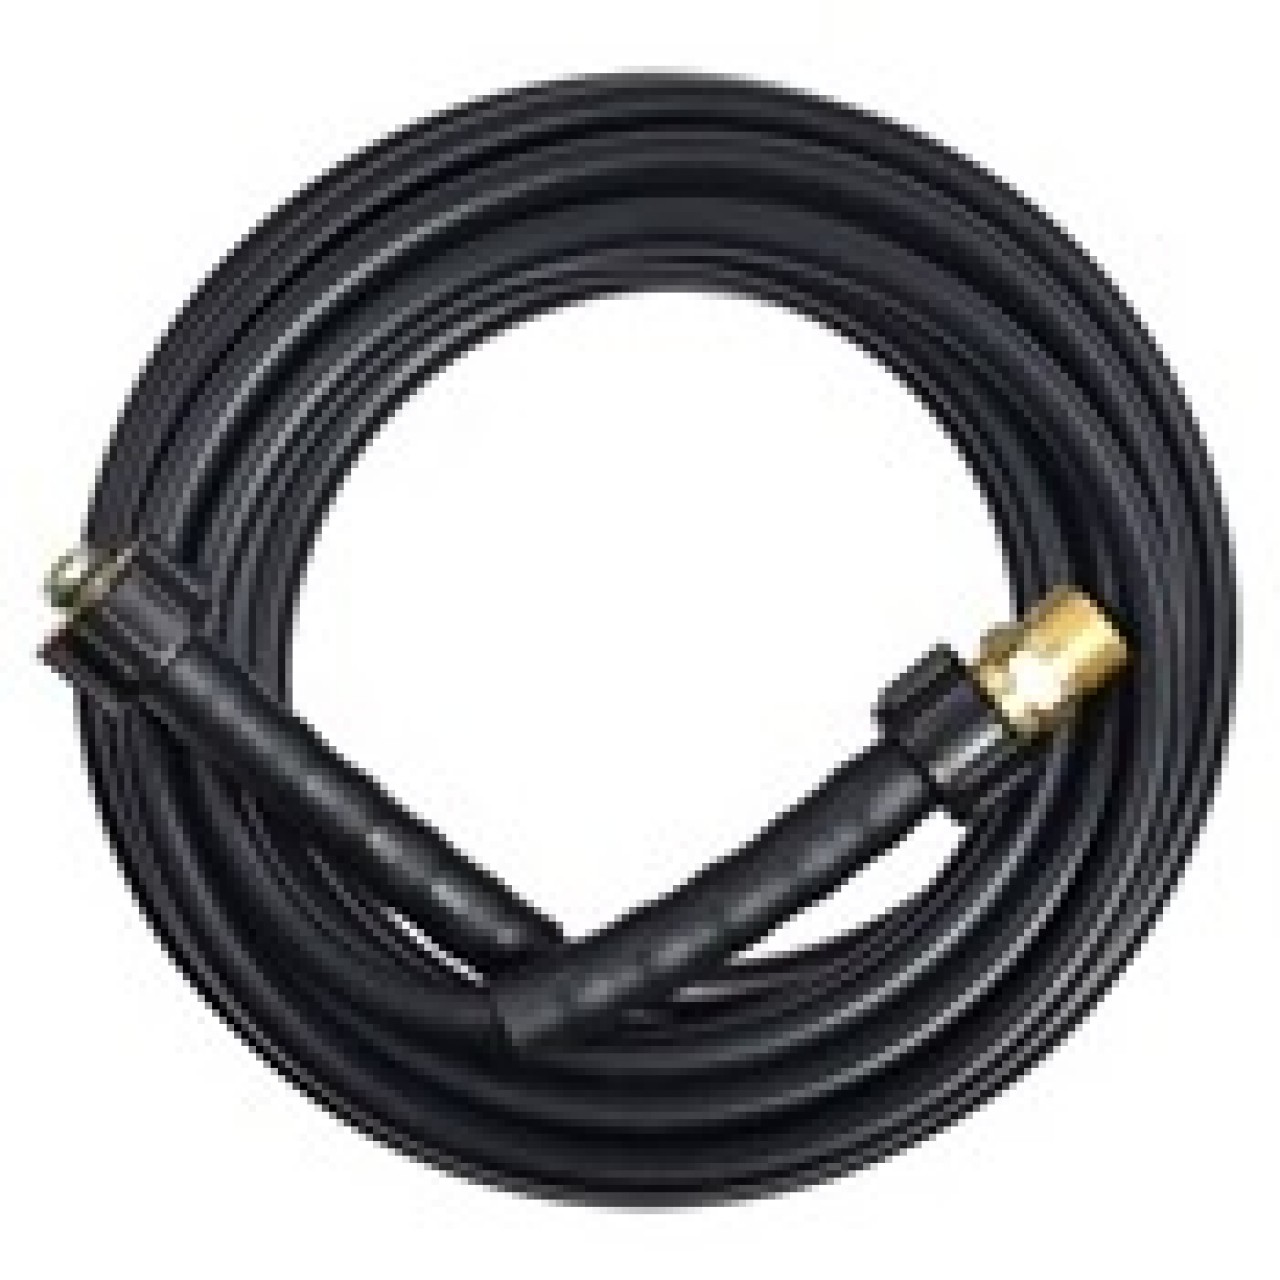 Maximus High Pressure Washer Hose Inlet Pipe For Car Washing - Black